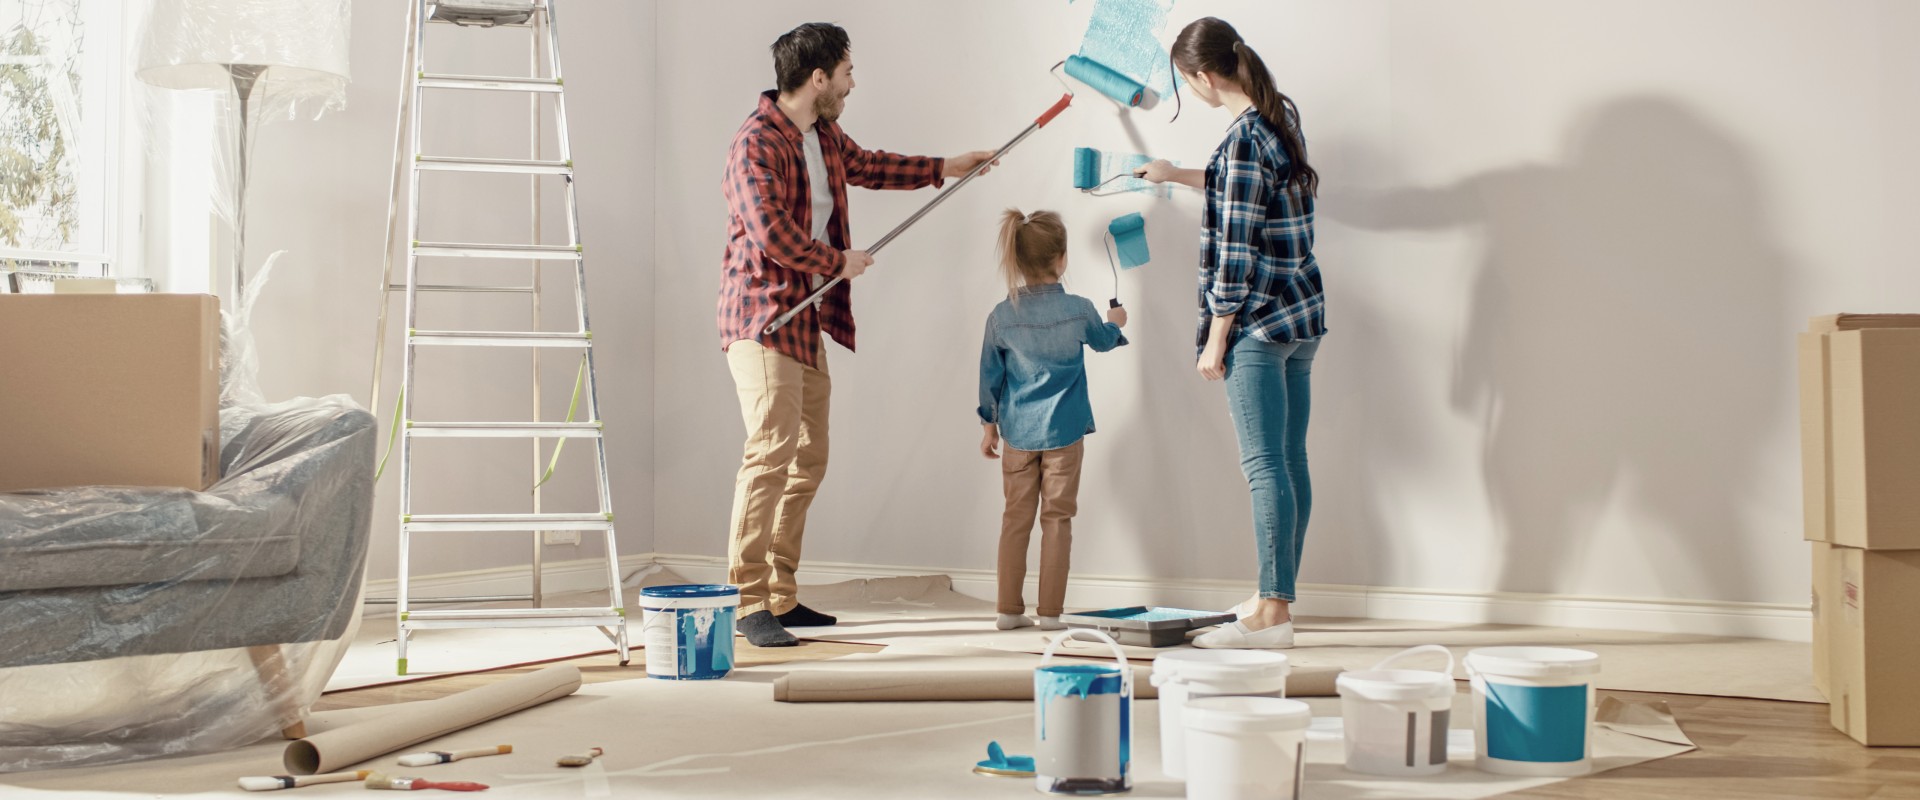 Family painting house